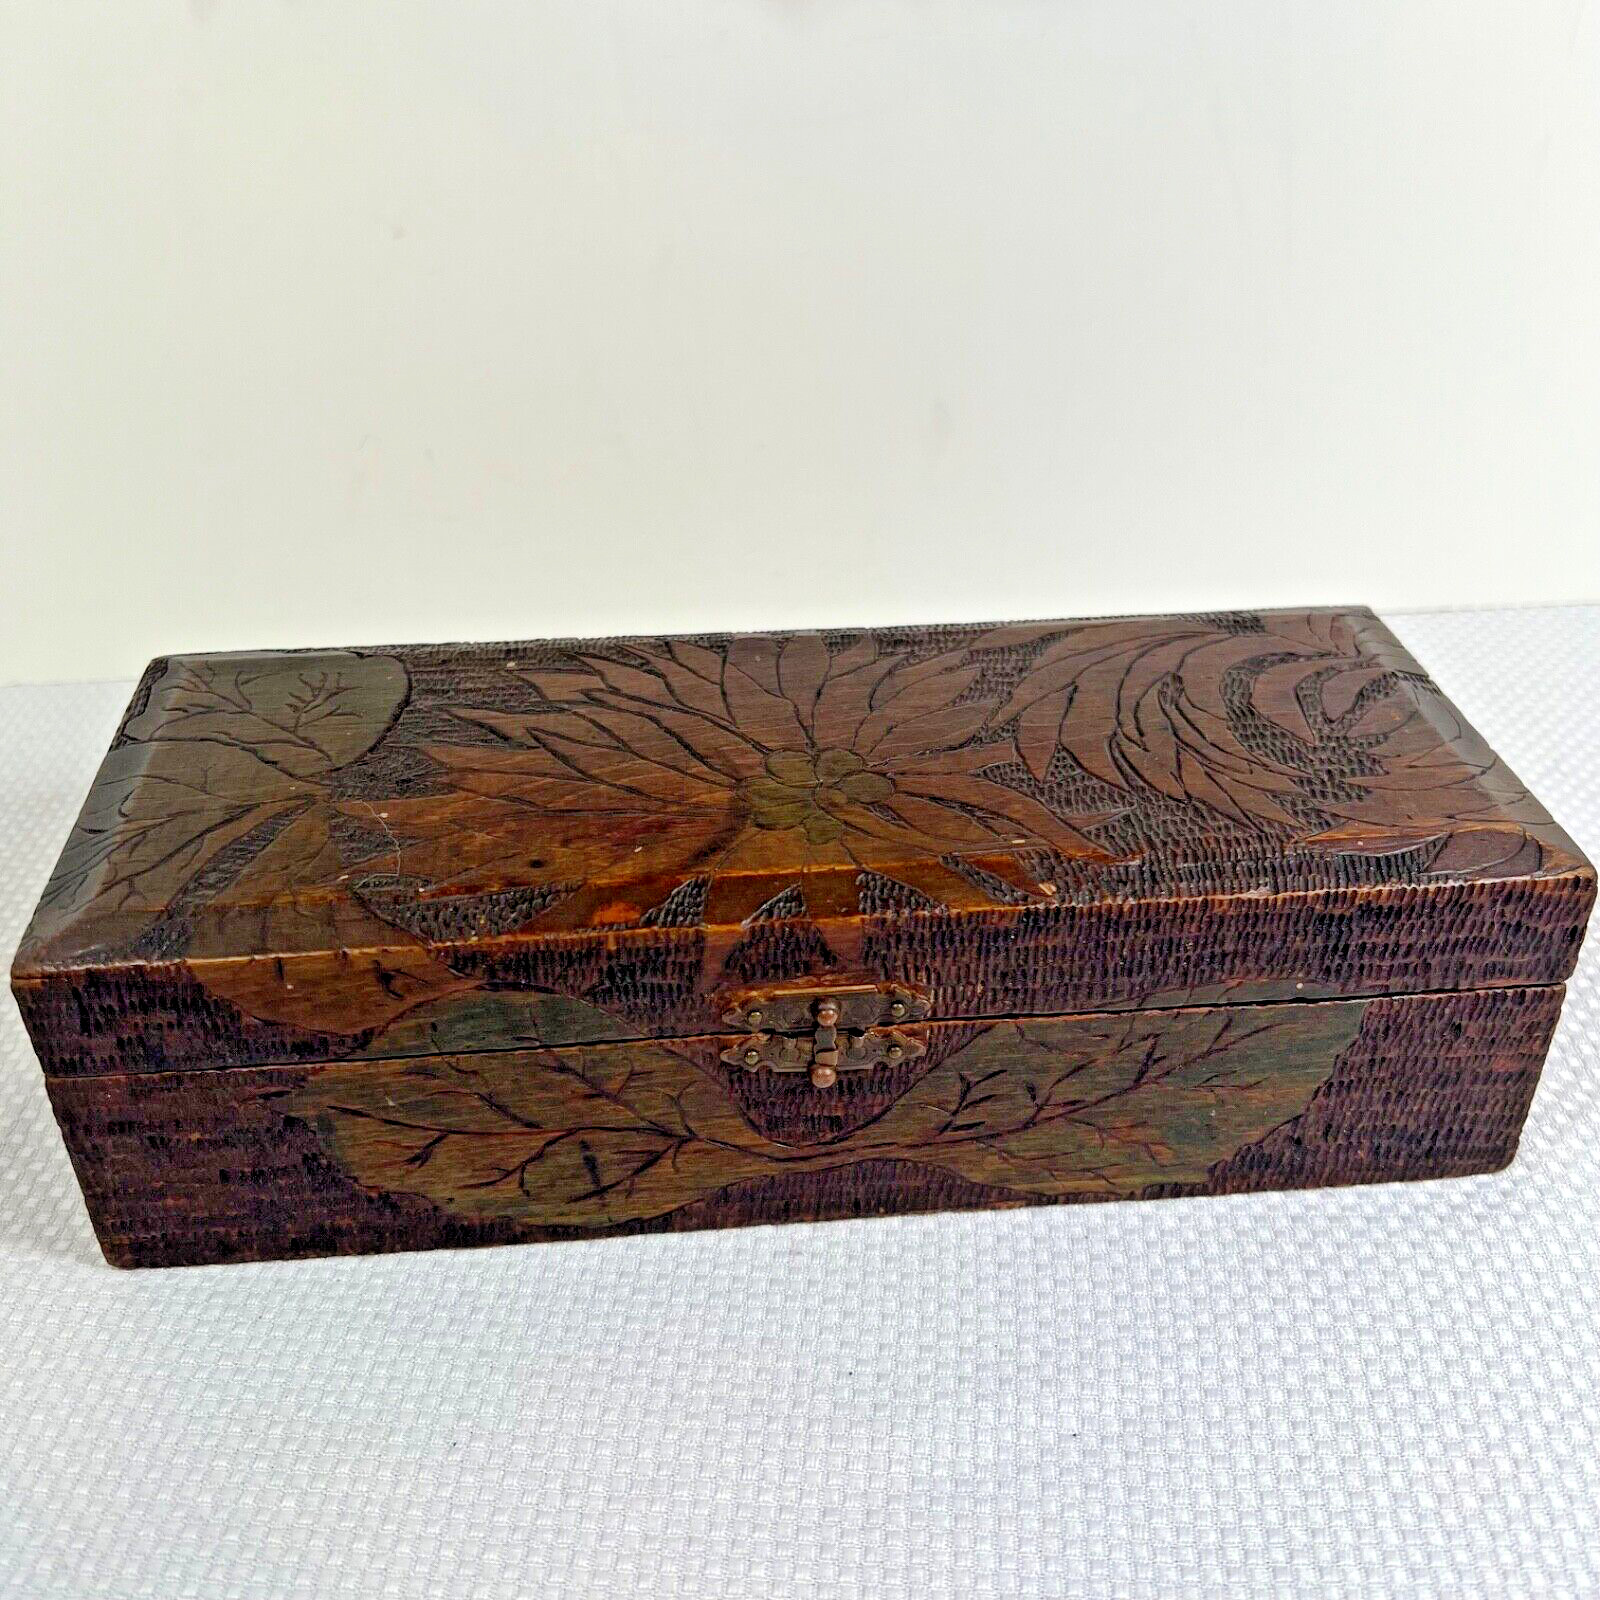 Antique Pyrography Wood Hinged Glove Box Burnt Wood Work Outside and Inside